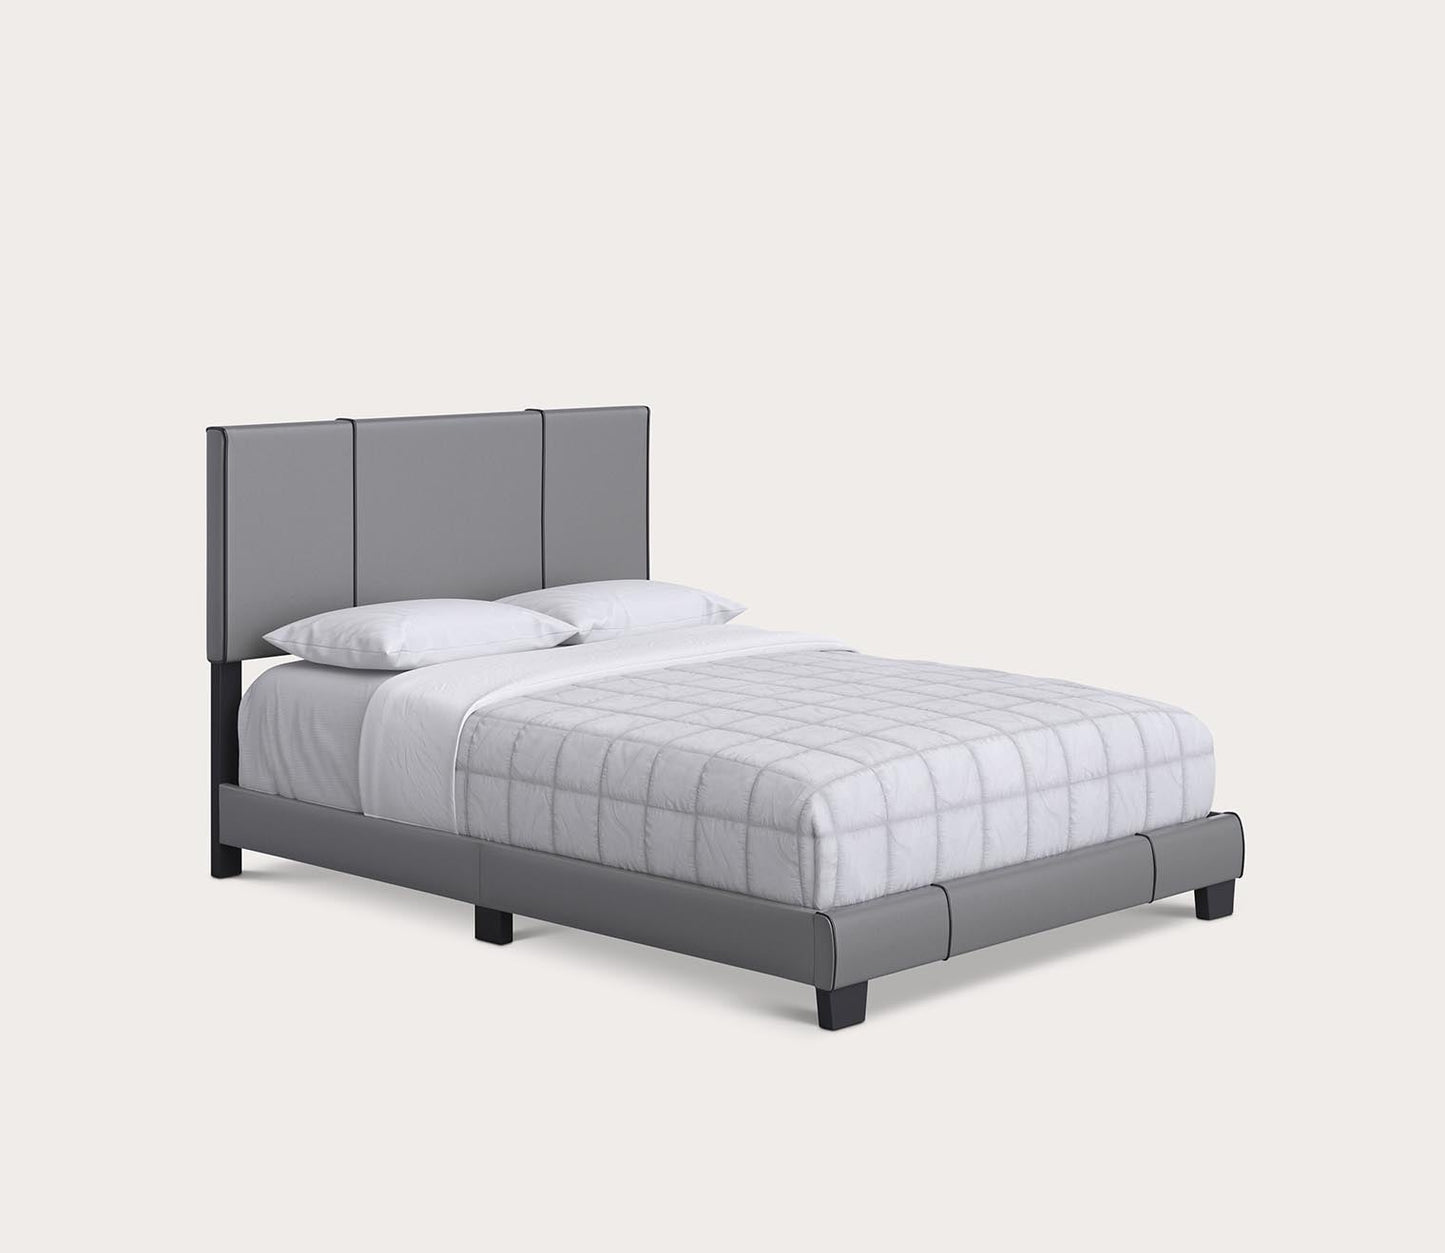 Chalet Faux Leather upholstered Platform Bed by Boyd Sleep